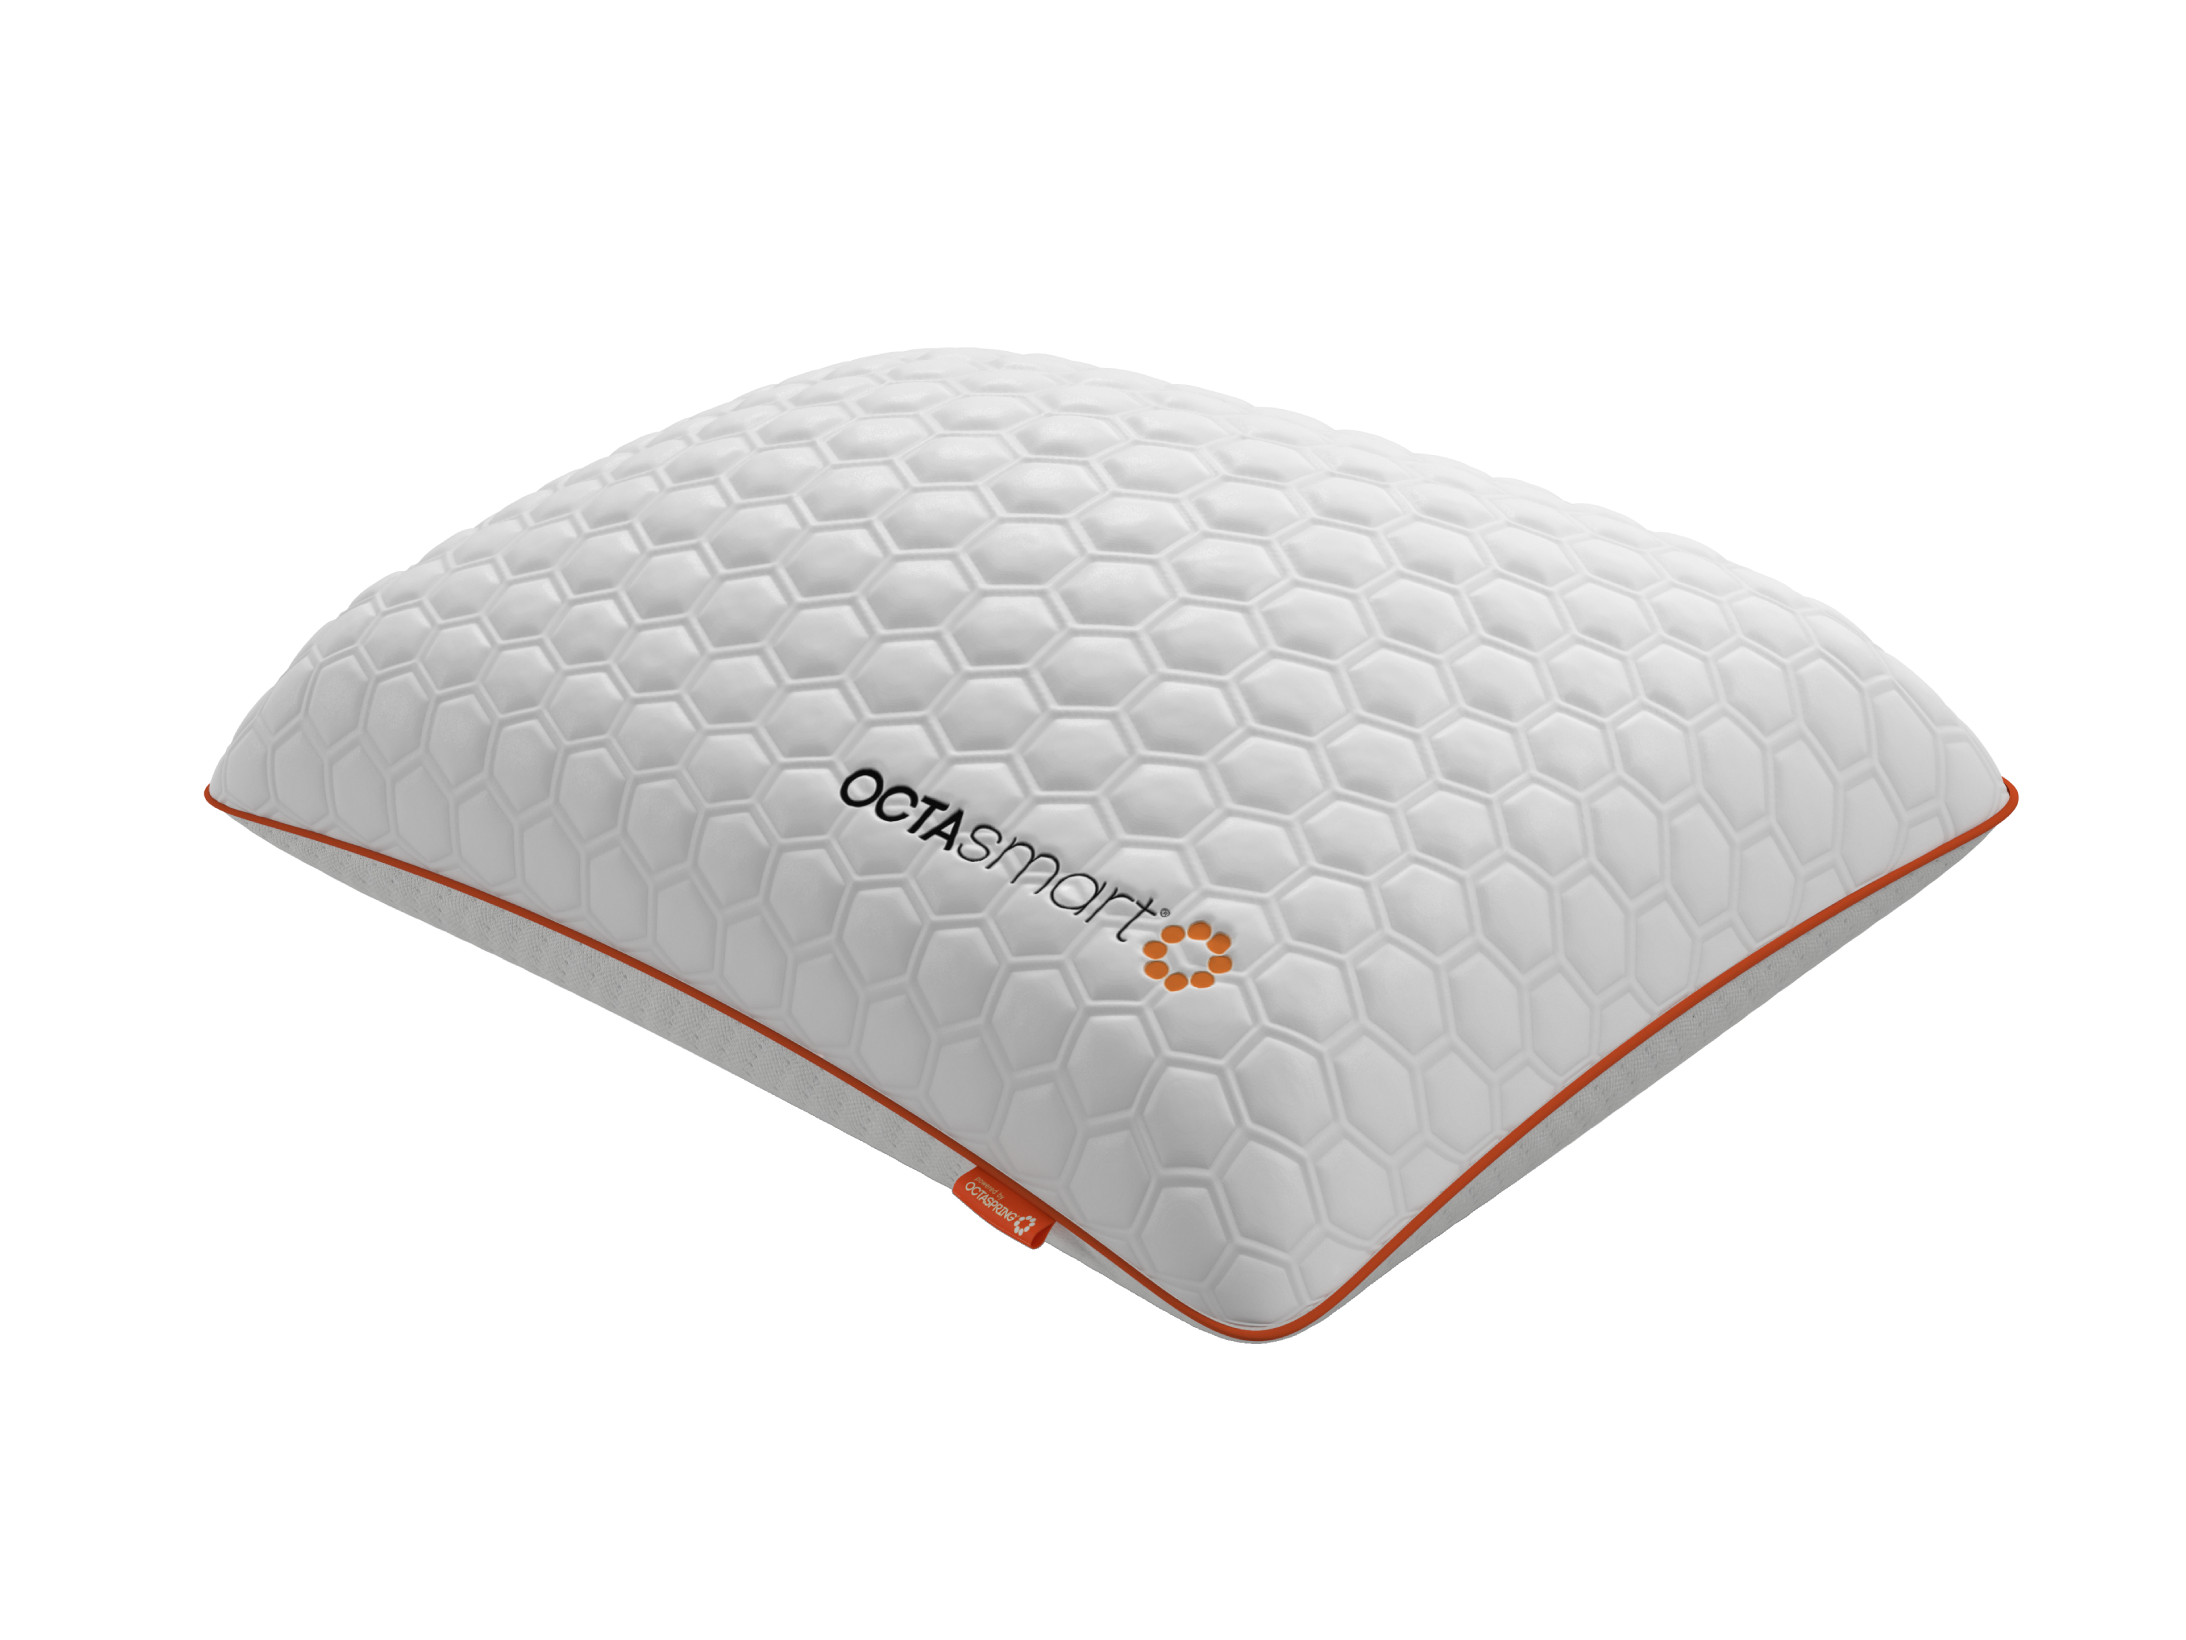 Best memory foam pillows for comfort and support